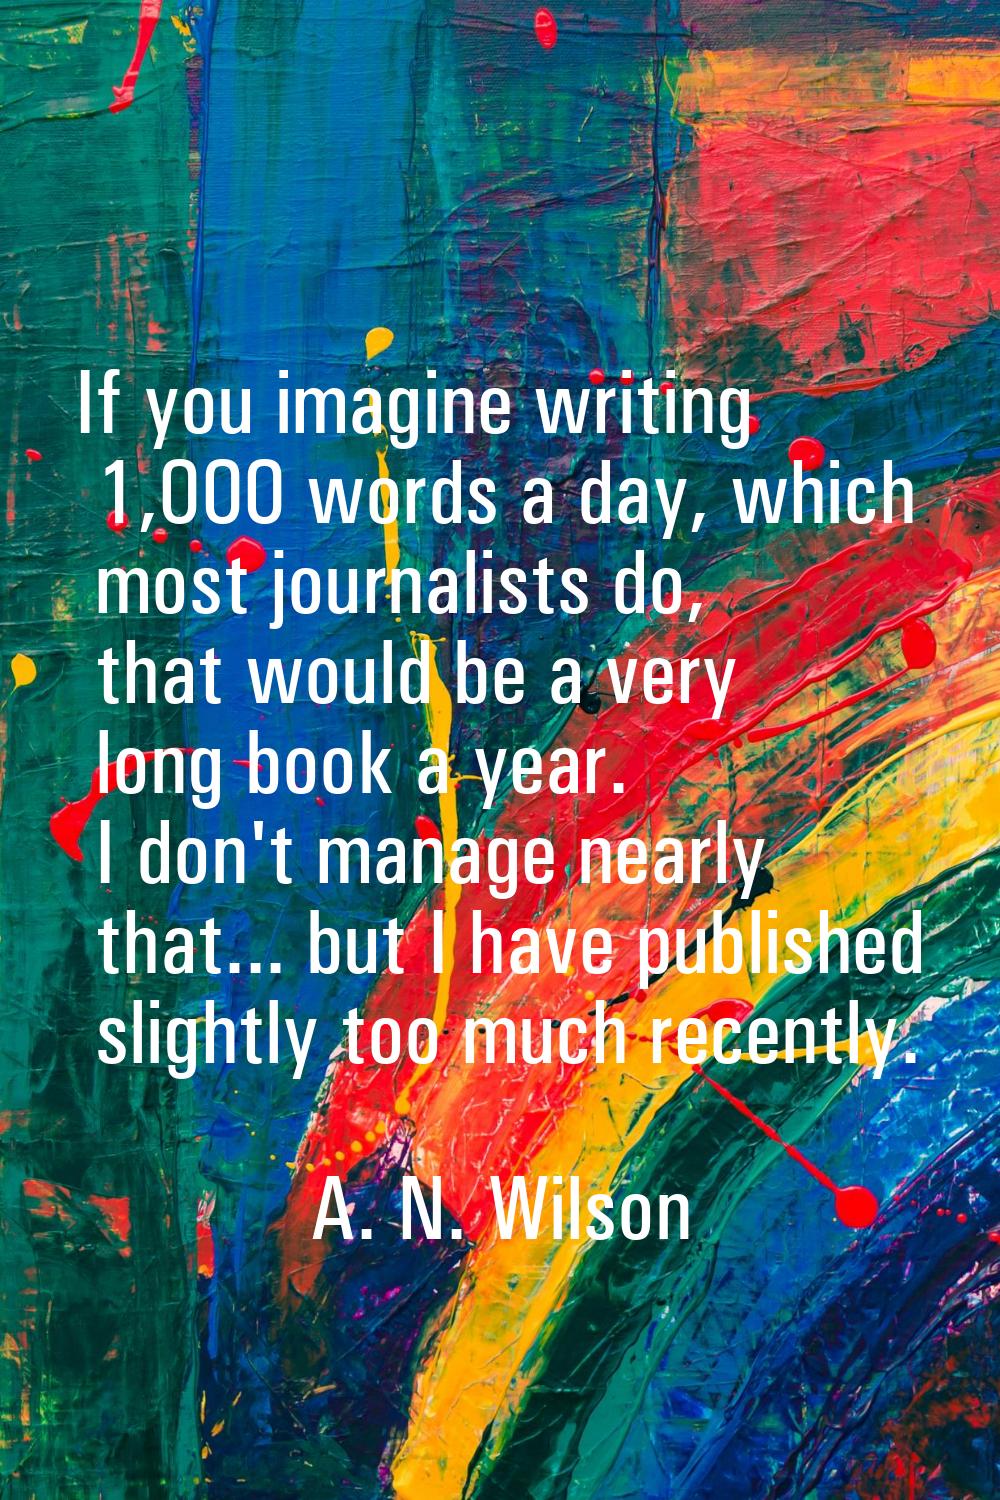 If you imagine writing 1,000 words a day, which most journalists do, that would be a very long book